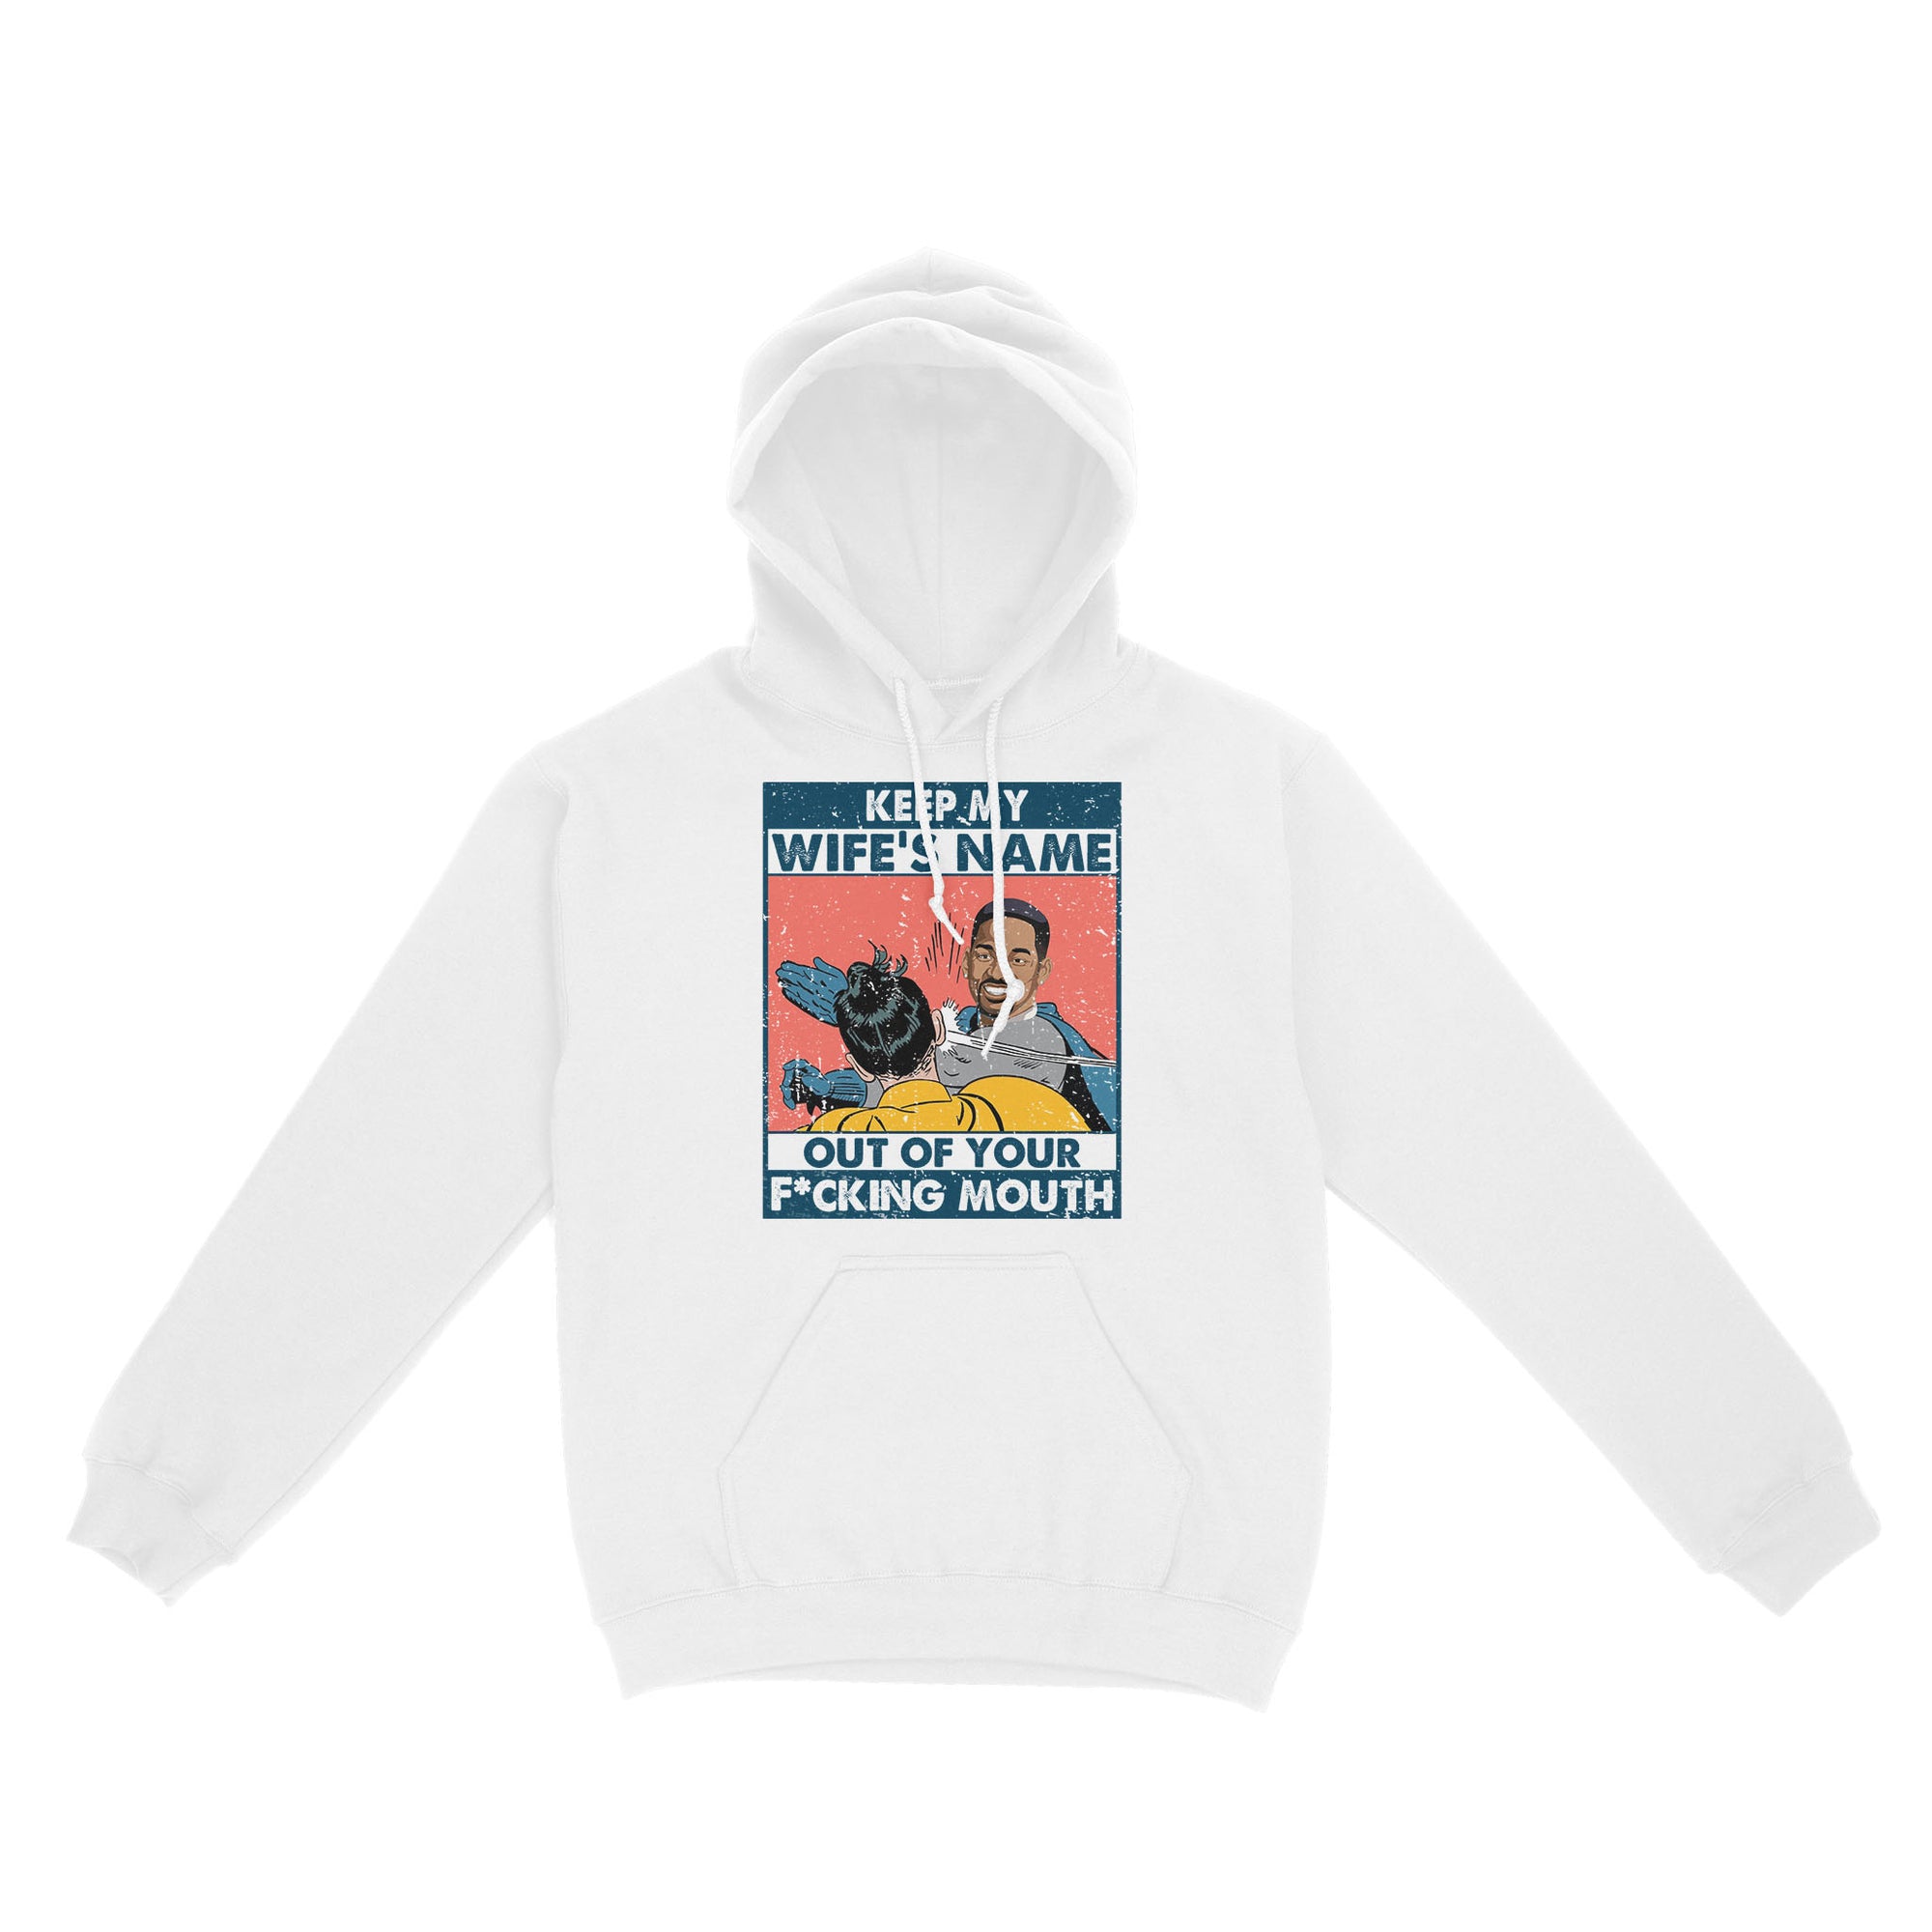 Keep My Wife’s Name Out Your Mouth,Will Smith, Oscar 2022 - Standard Hoodie